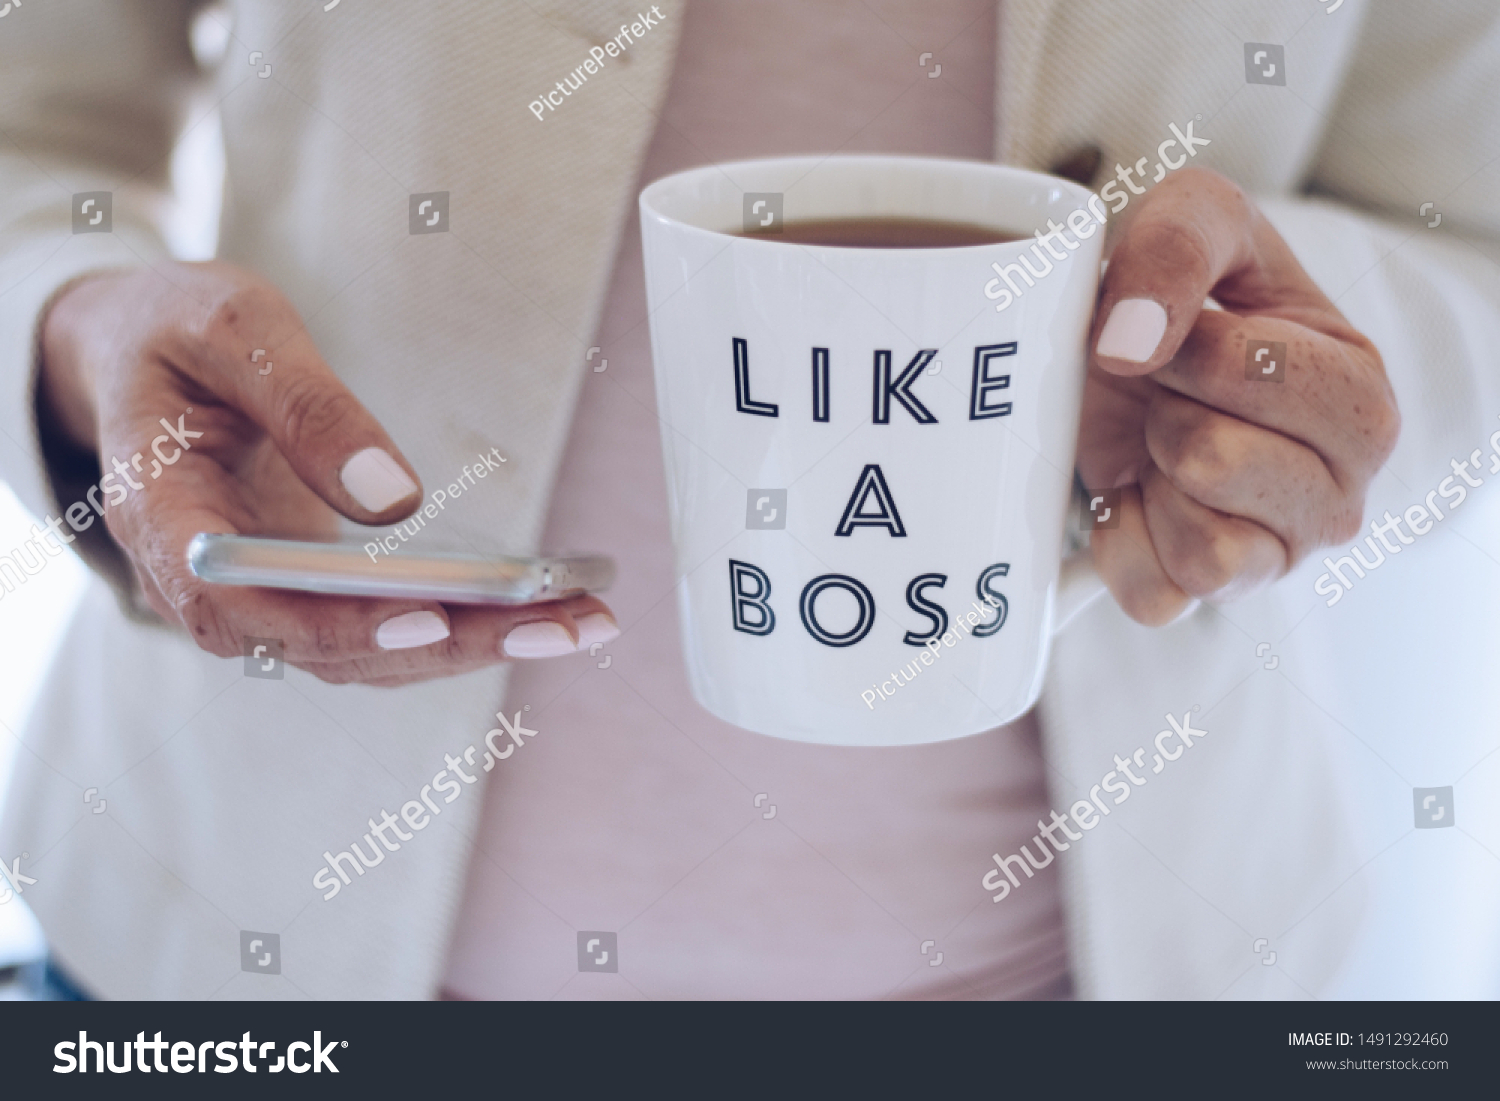 Professional woman using mobile phone and holding a cup that says LIKE A BOSS #1491292460